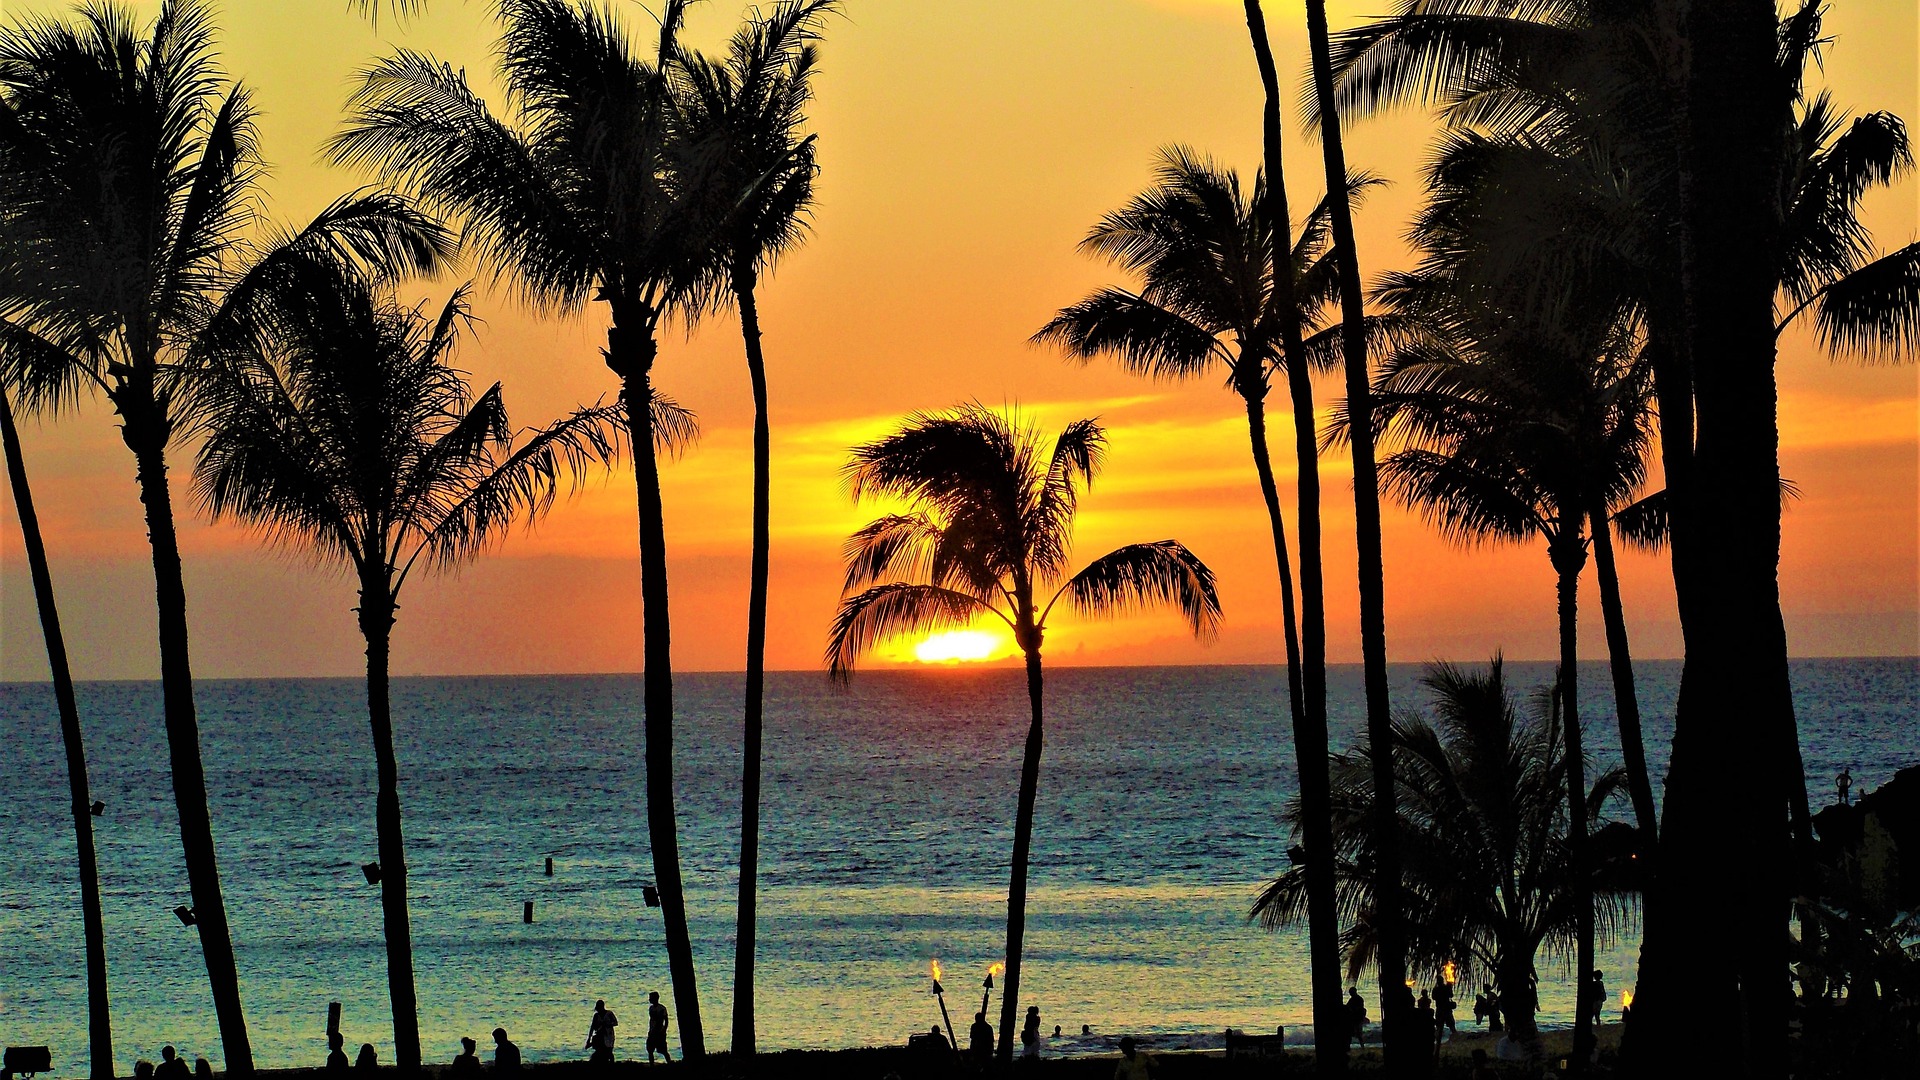 Oceanfront dining on Kauai offers beautiful sunset dining opportunities.